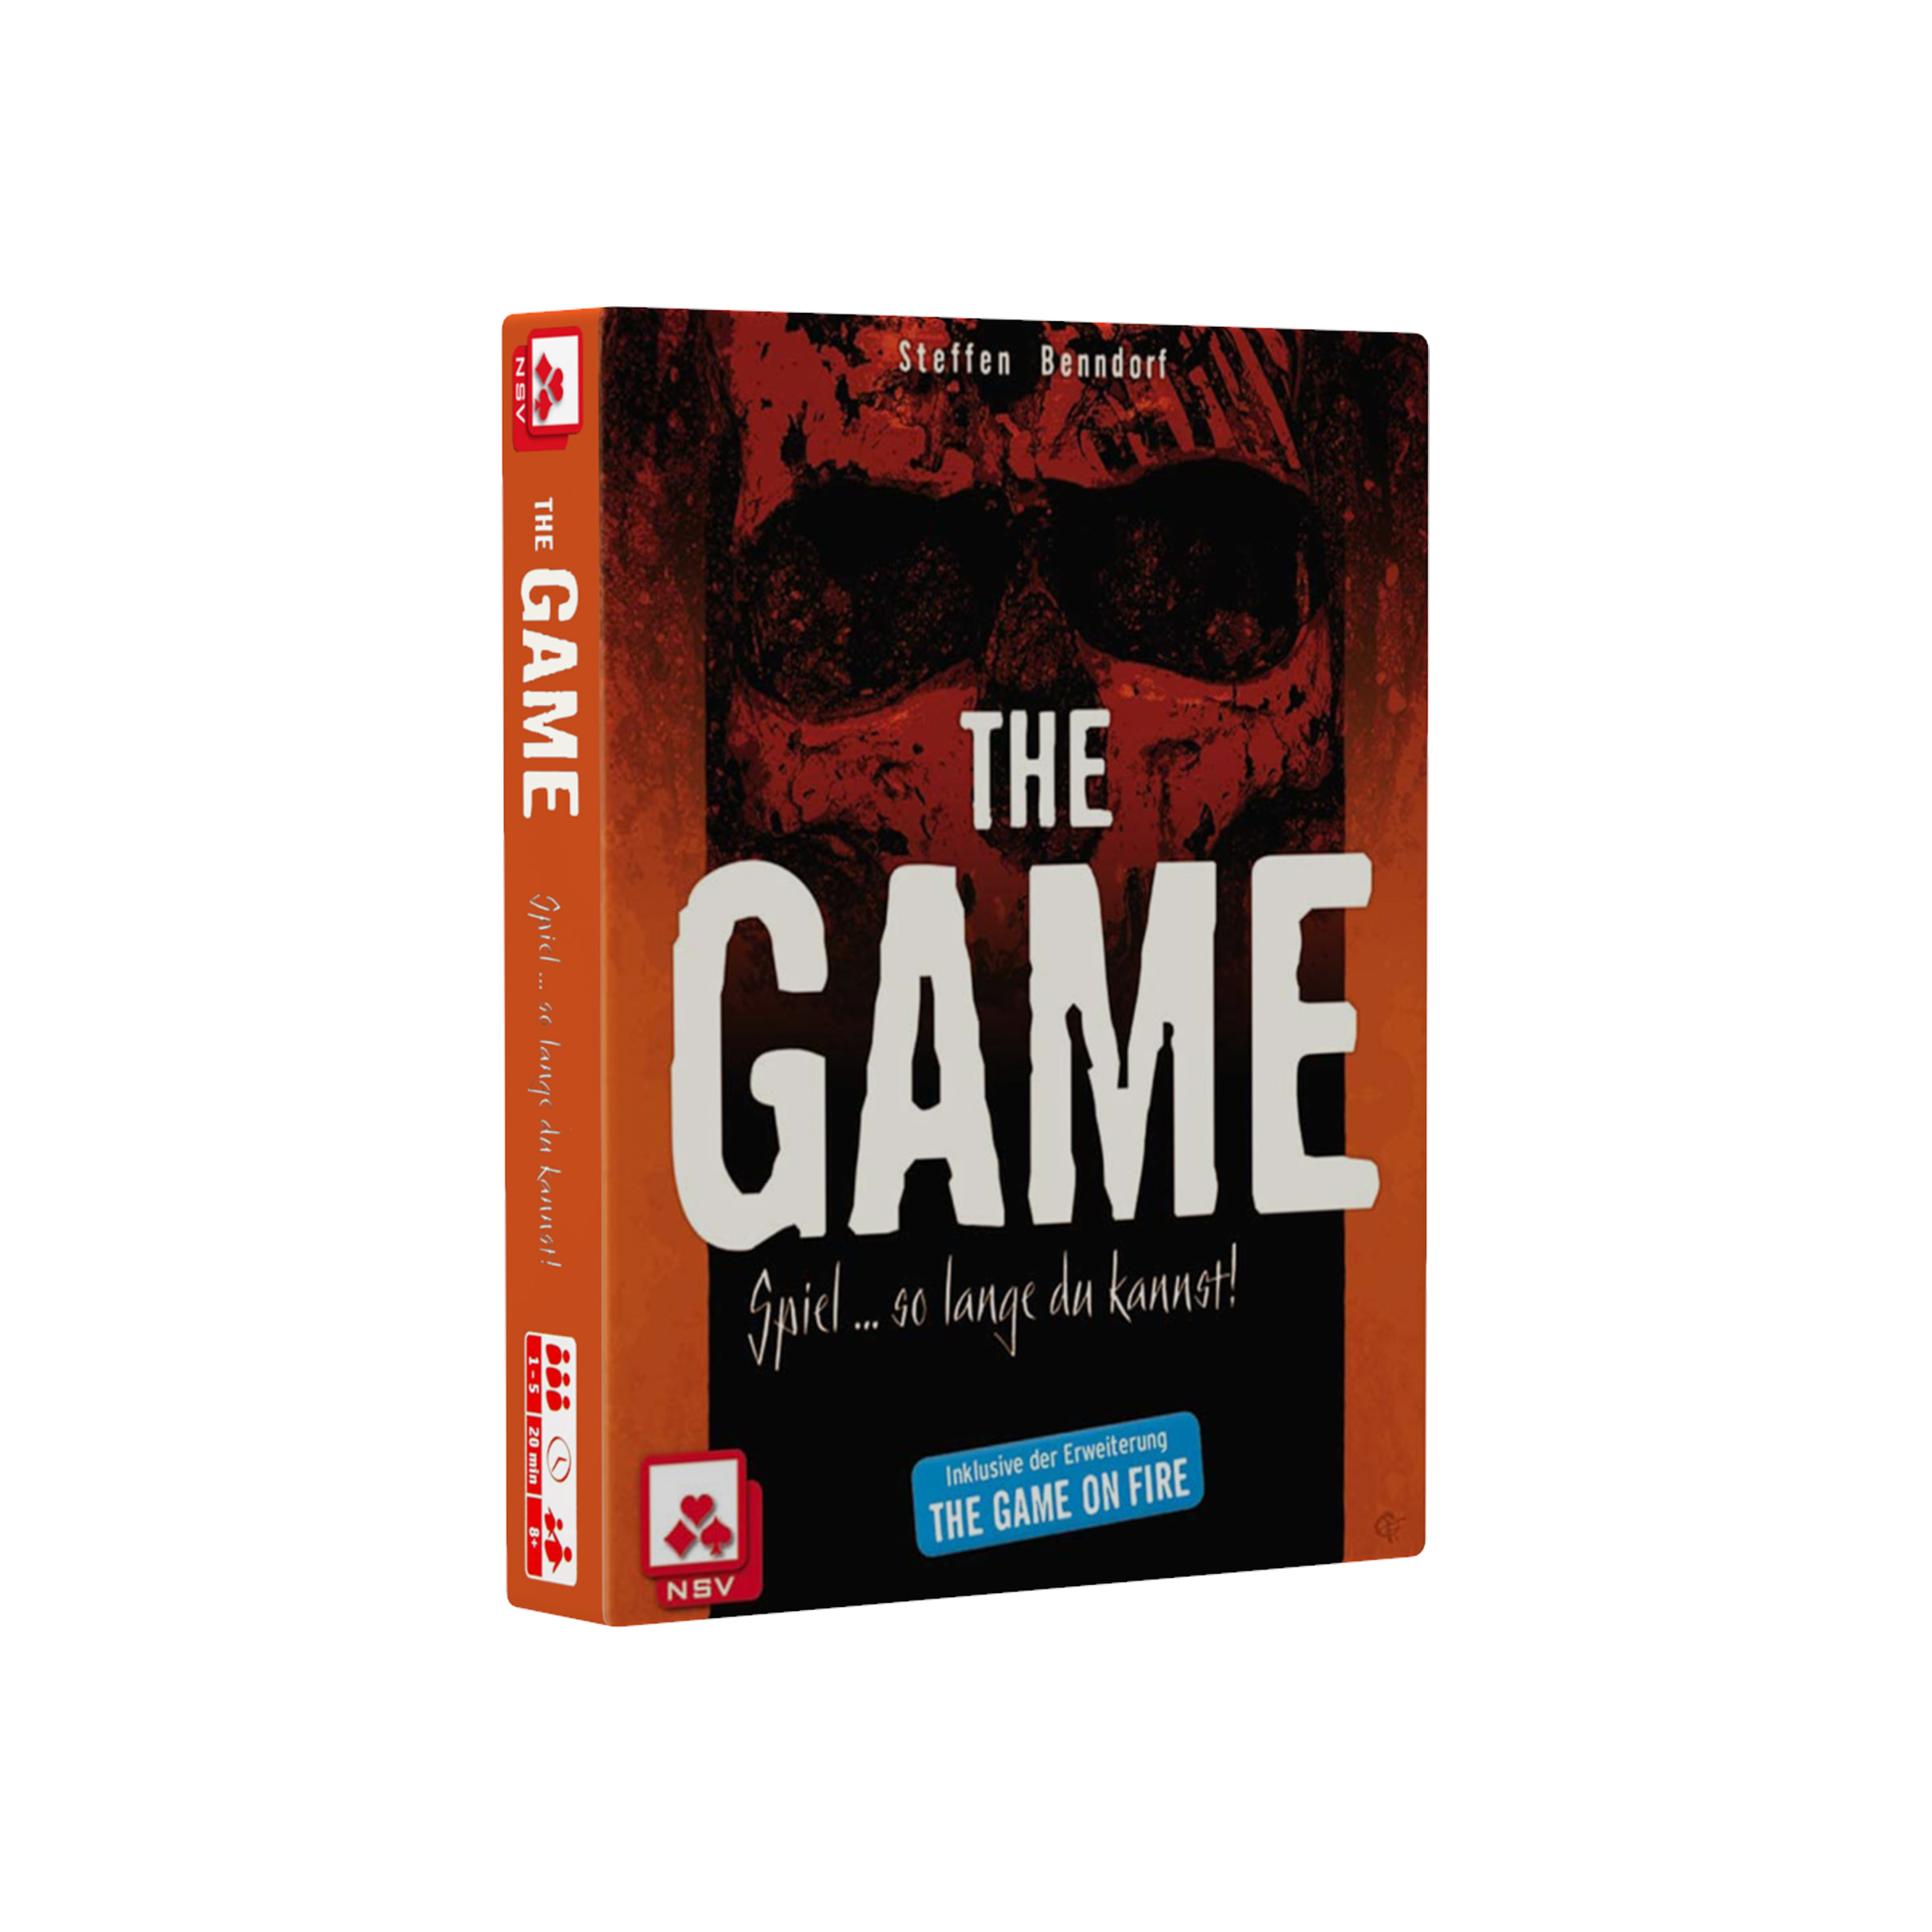 Game The Game (German)